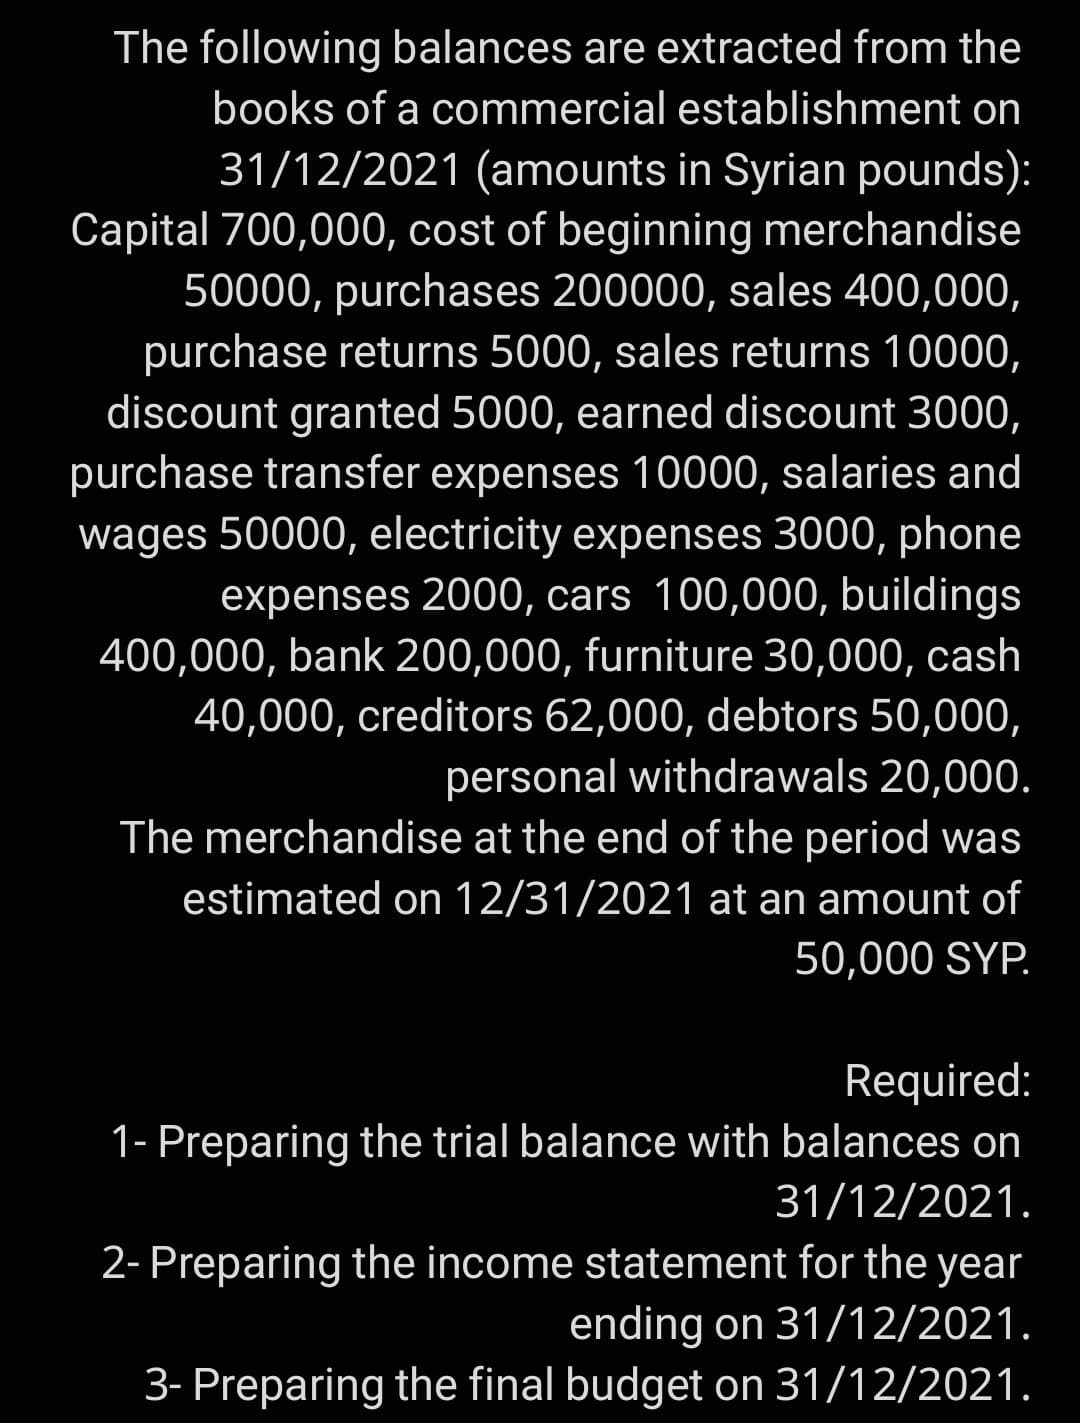 The following balances are extracted from the
books of a commercial establishment on
31/12/2021 (amounts in Syrian pounds):
Capital 700,000, cost of beginning merchandise
50000, purchases 200000, sales 400,000,
purchase returns 5000, sales returns 10000,
discount granted 5000, earned discount 3000,
purchase transfer expenses 10000, salaries and
wages 50000, electricity expenses 3000, phone
expenses 2000, cars 100,000, buildings
400,000, bank 200,000, furniture 30,000, cash
40,000, creditors 62,000, debtors 50,000,
personal withdrawals 20,000.
The merchandise at the end of the period was
estimated on 12/31/2021 at an amount of
50,000 SYP.
Required:
1- Preparing the trial balance with balances on
31/12/2021.
2- Preparing the income statement for the year
ending on 31/12/2021.
3- Preparing the final budget on 31/12/2021.